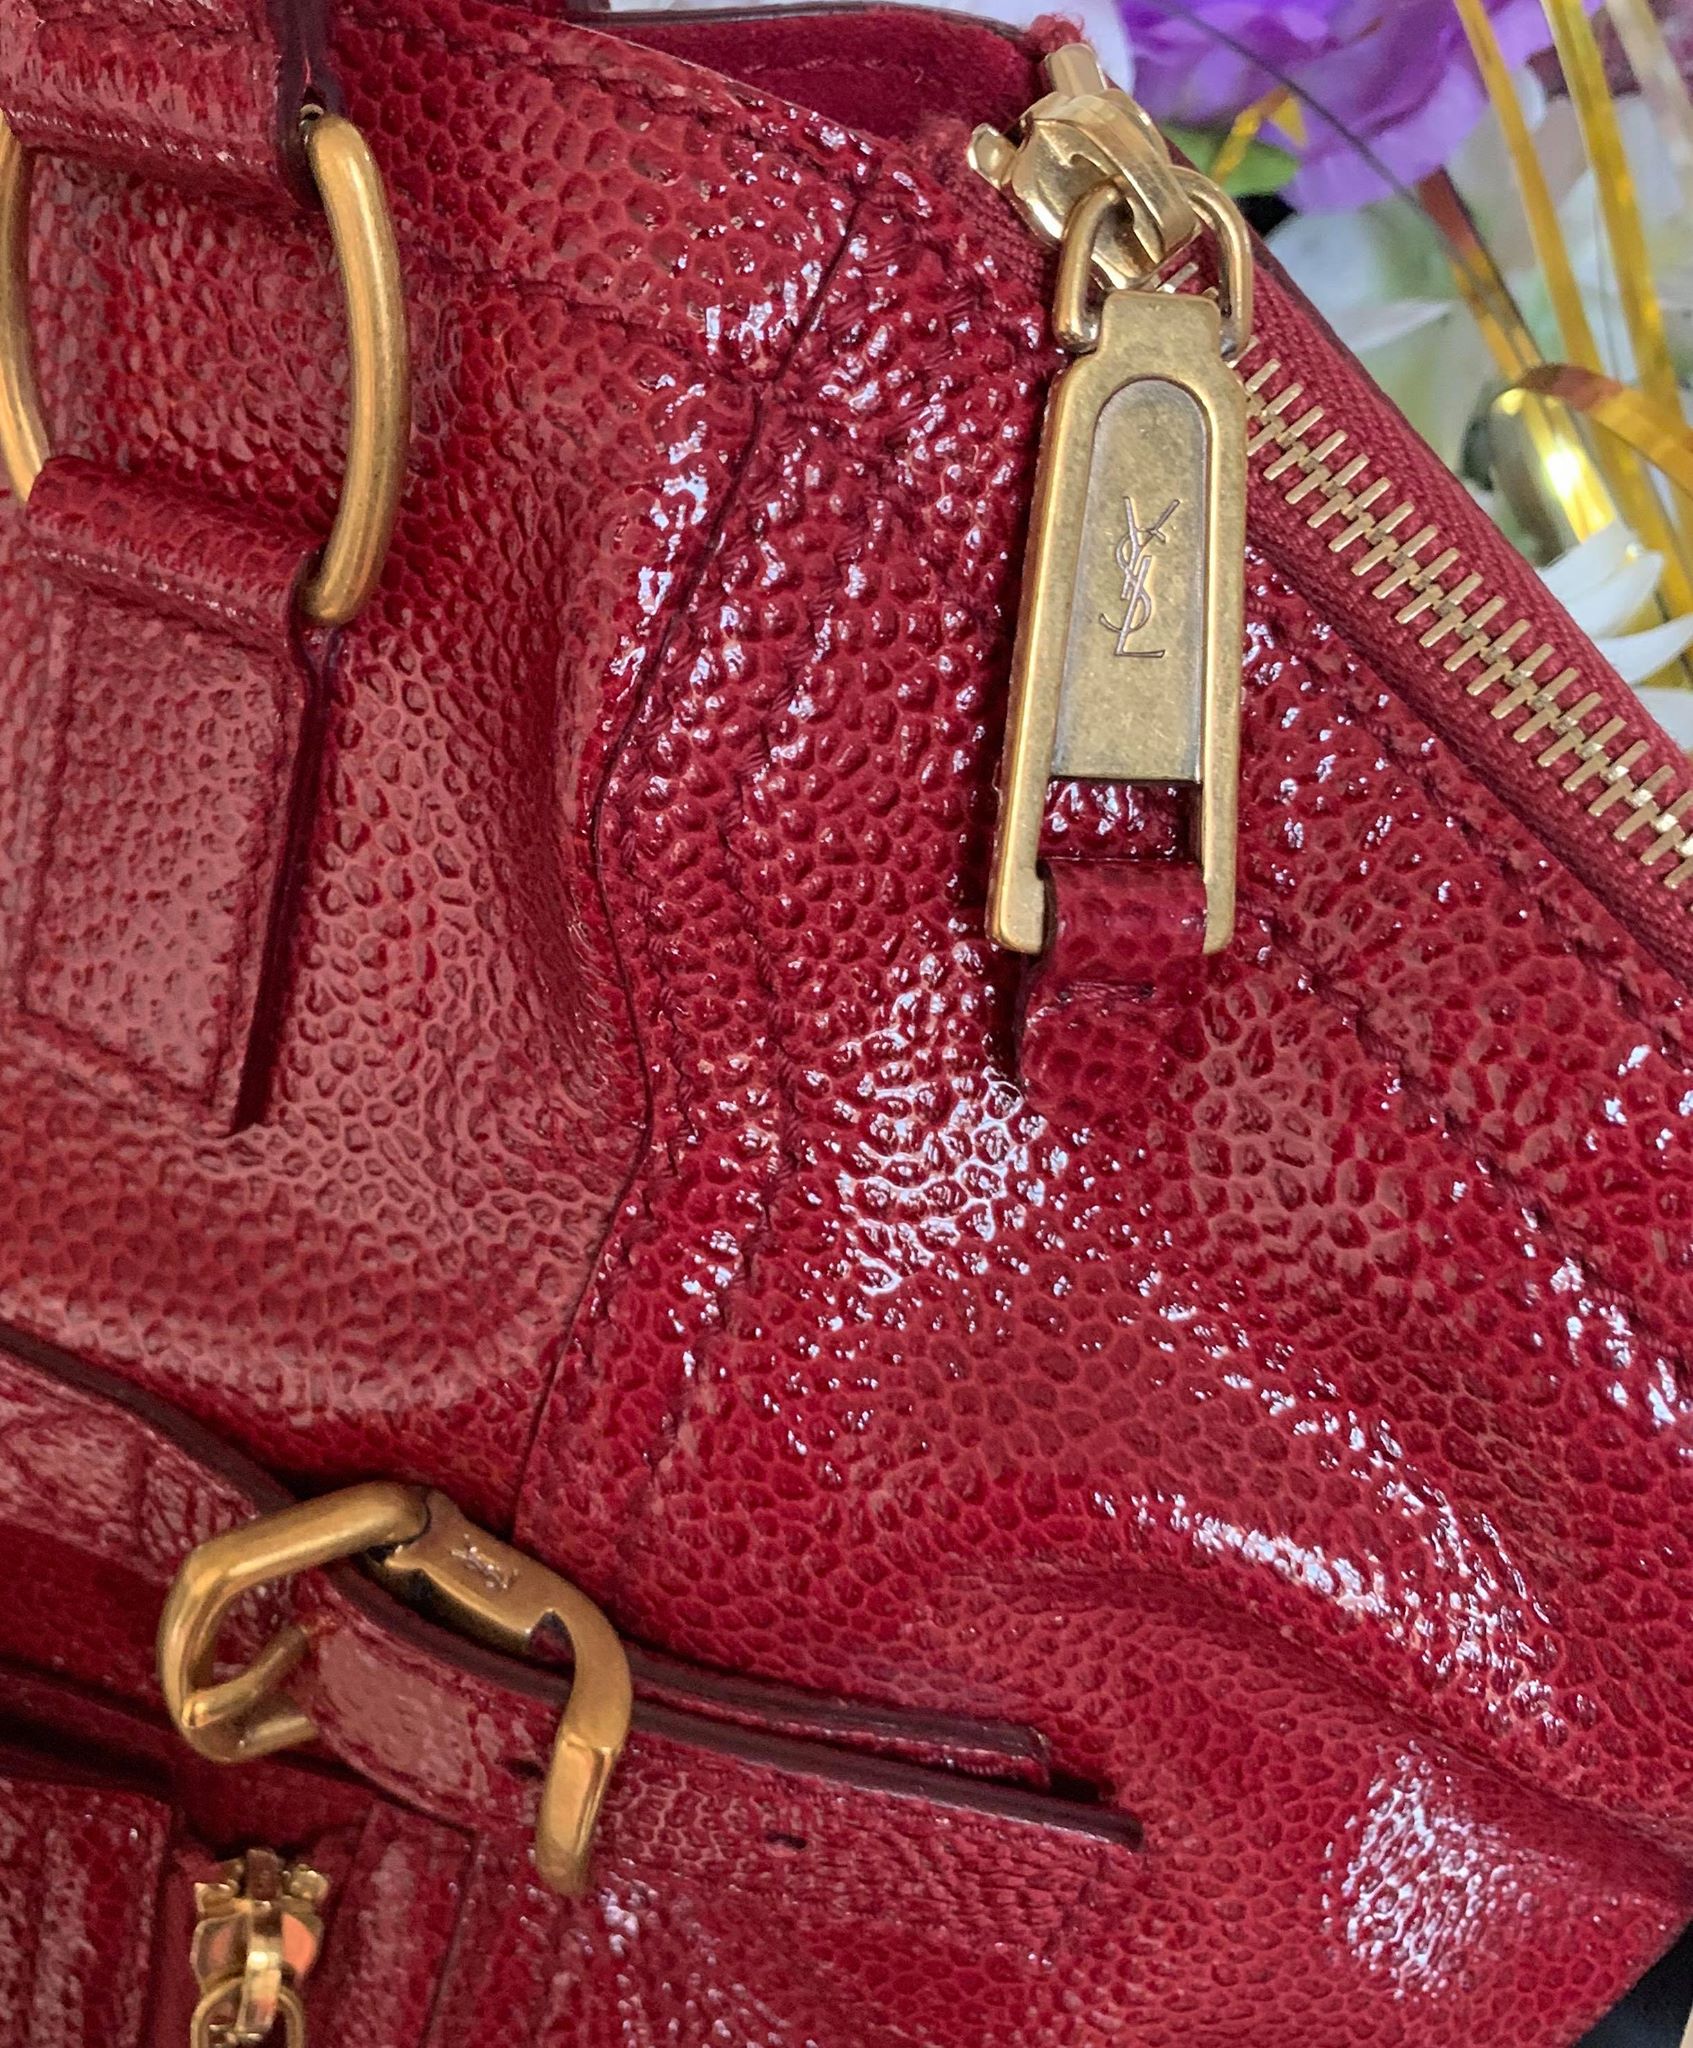 JOYCE'S CLOSET STAYS AUTHENTIC WITH NEW HANDBAG AUTHENTICATION SERVICE –  Joyce's Closet